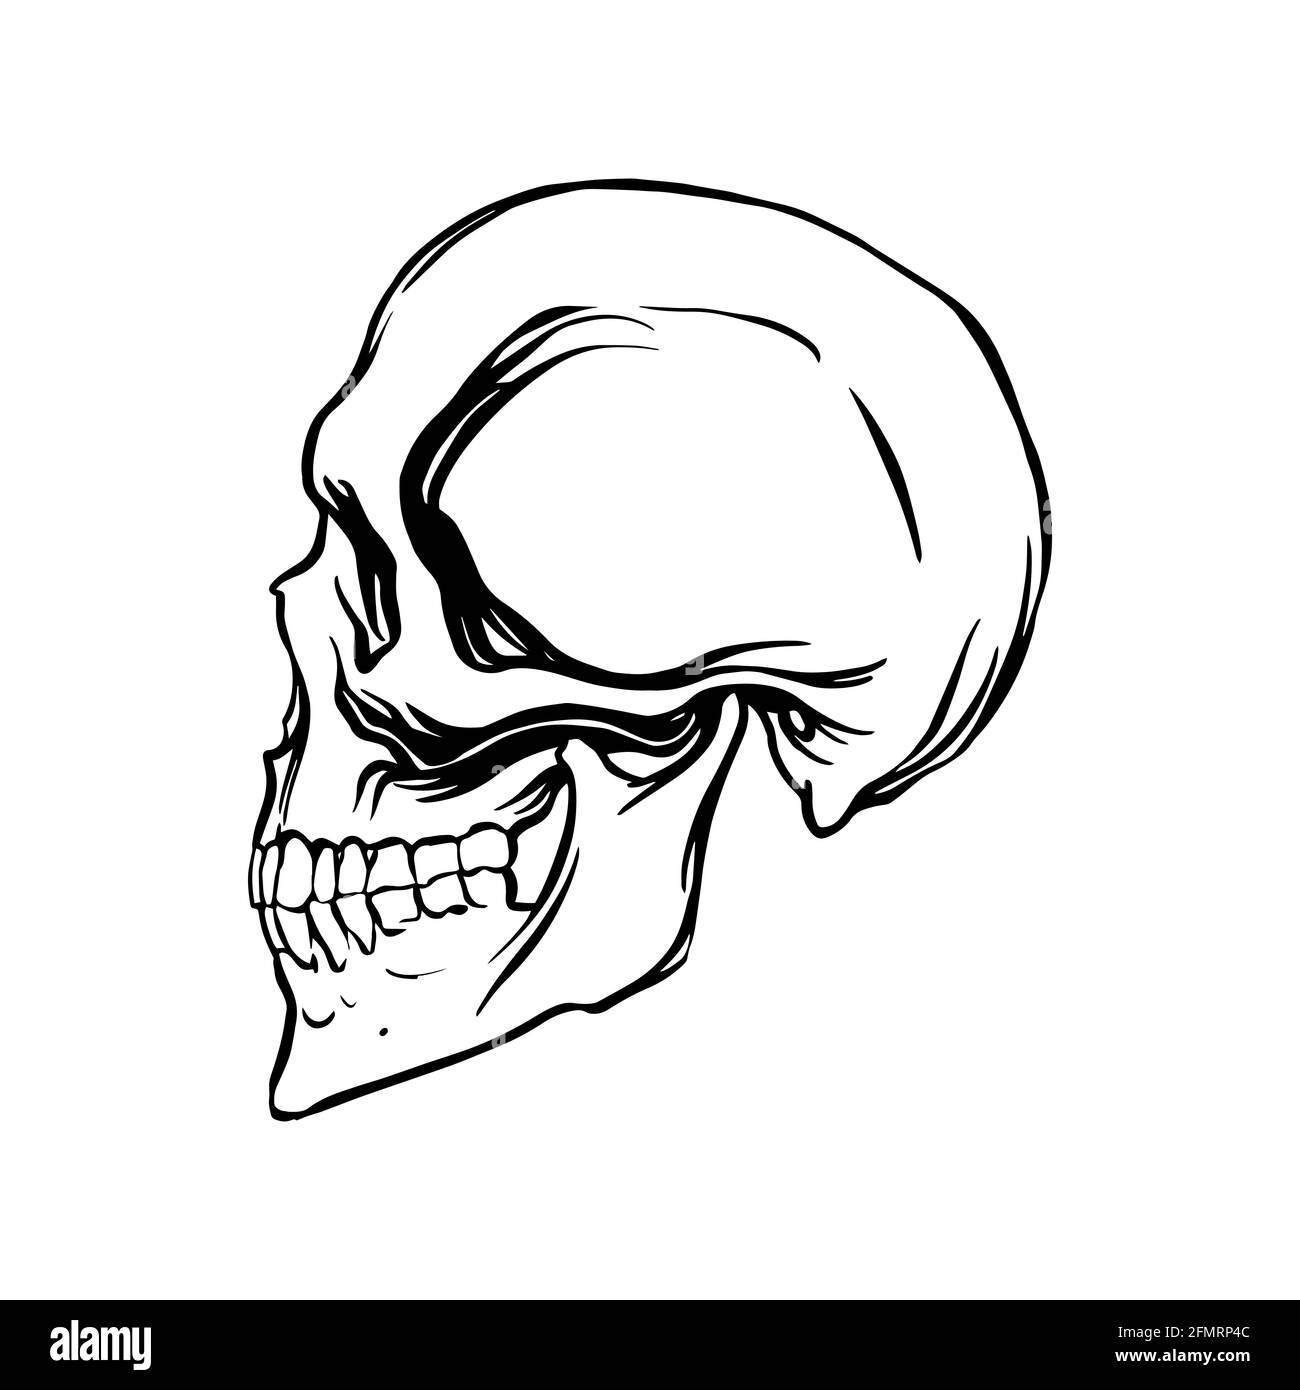 Side view of a human skull in a linear style. Vector illustration. Stock Vector